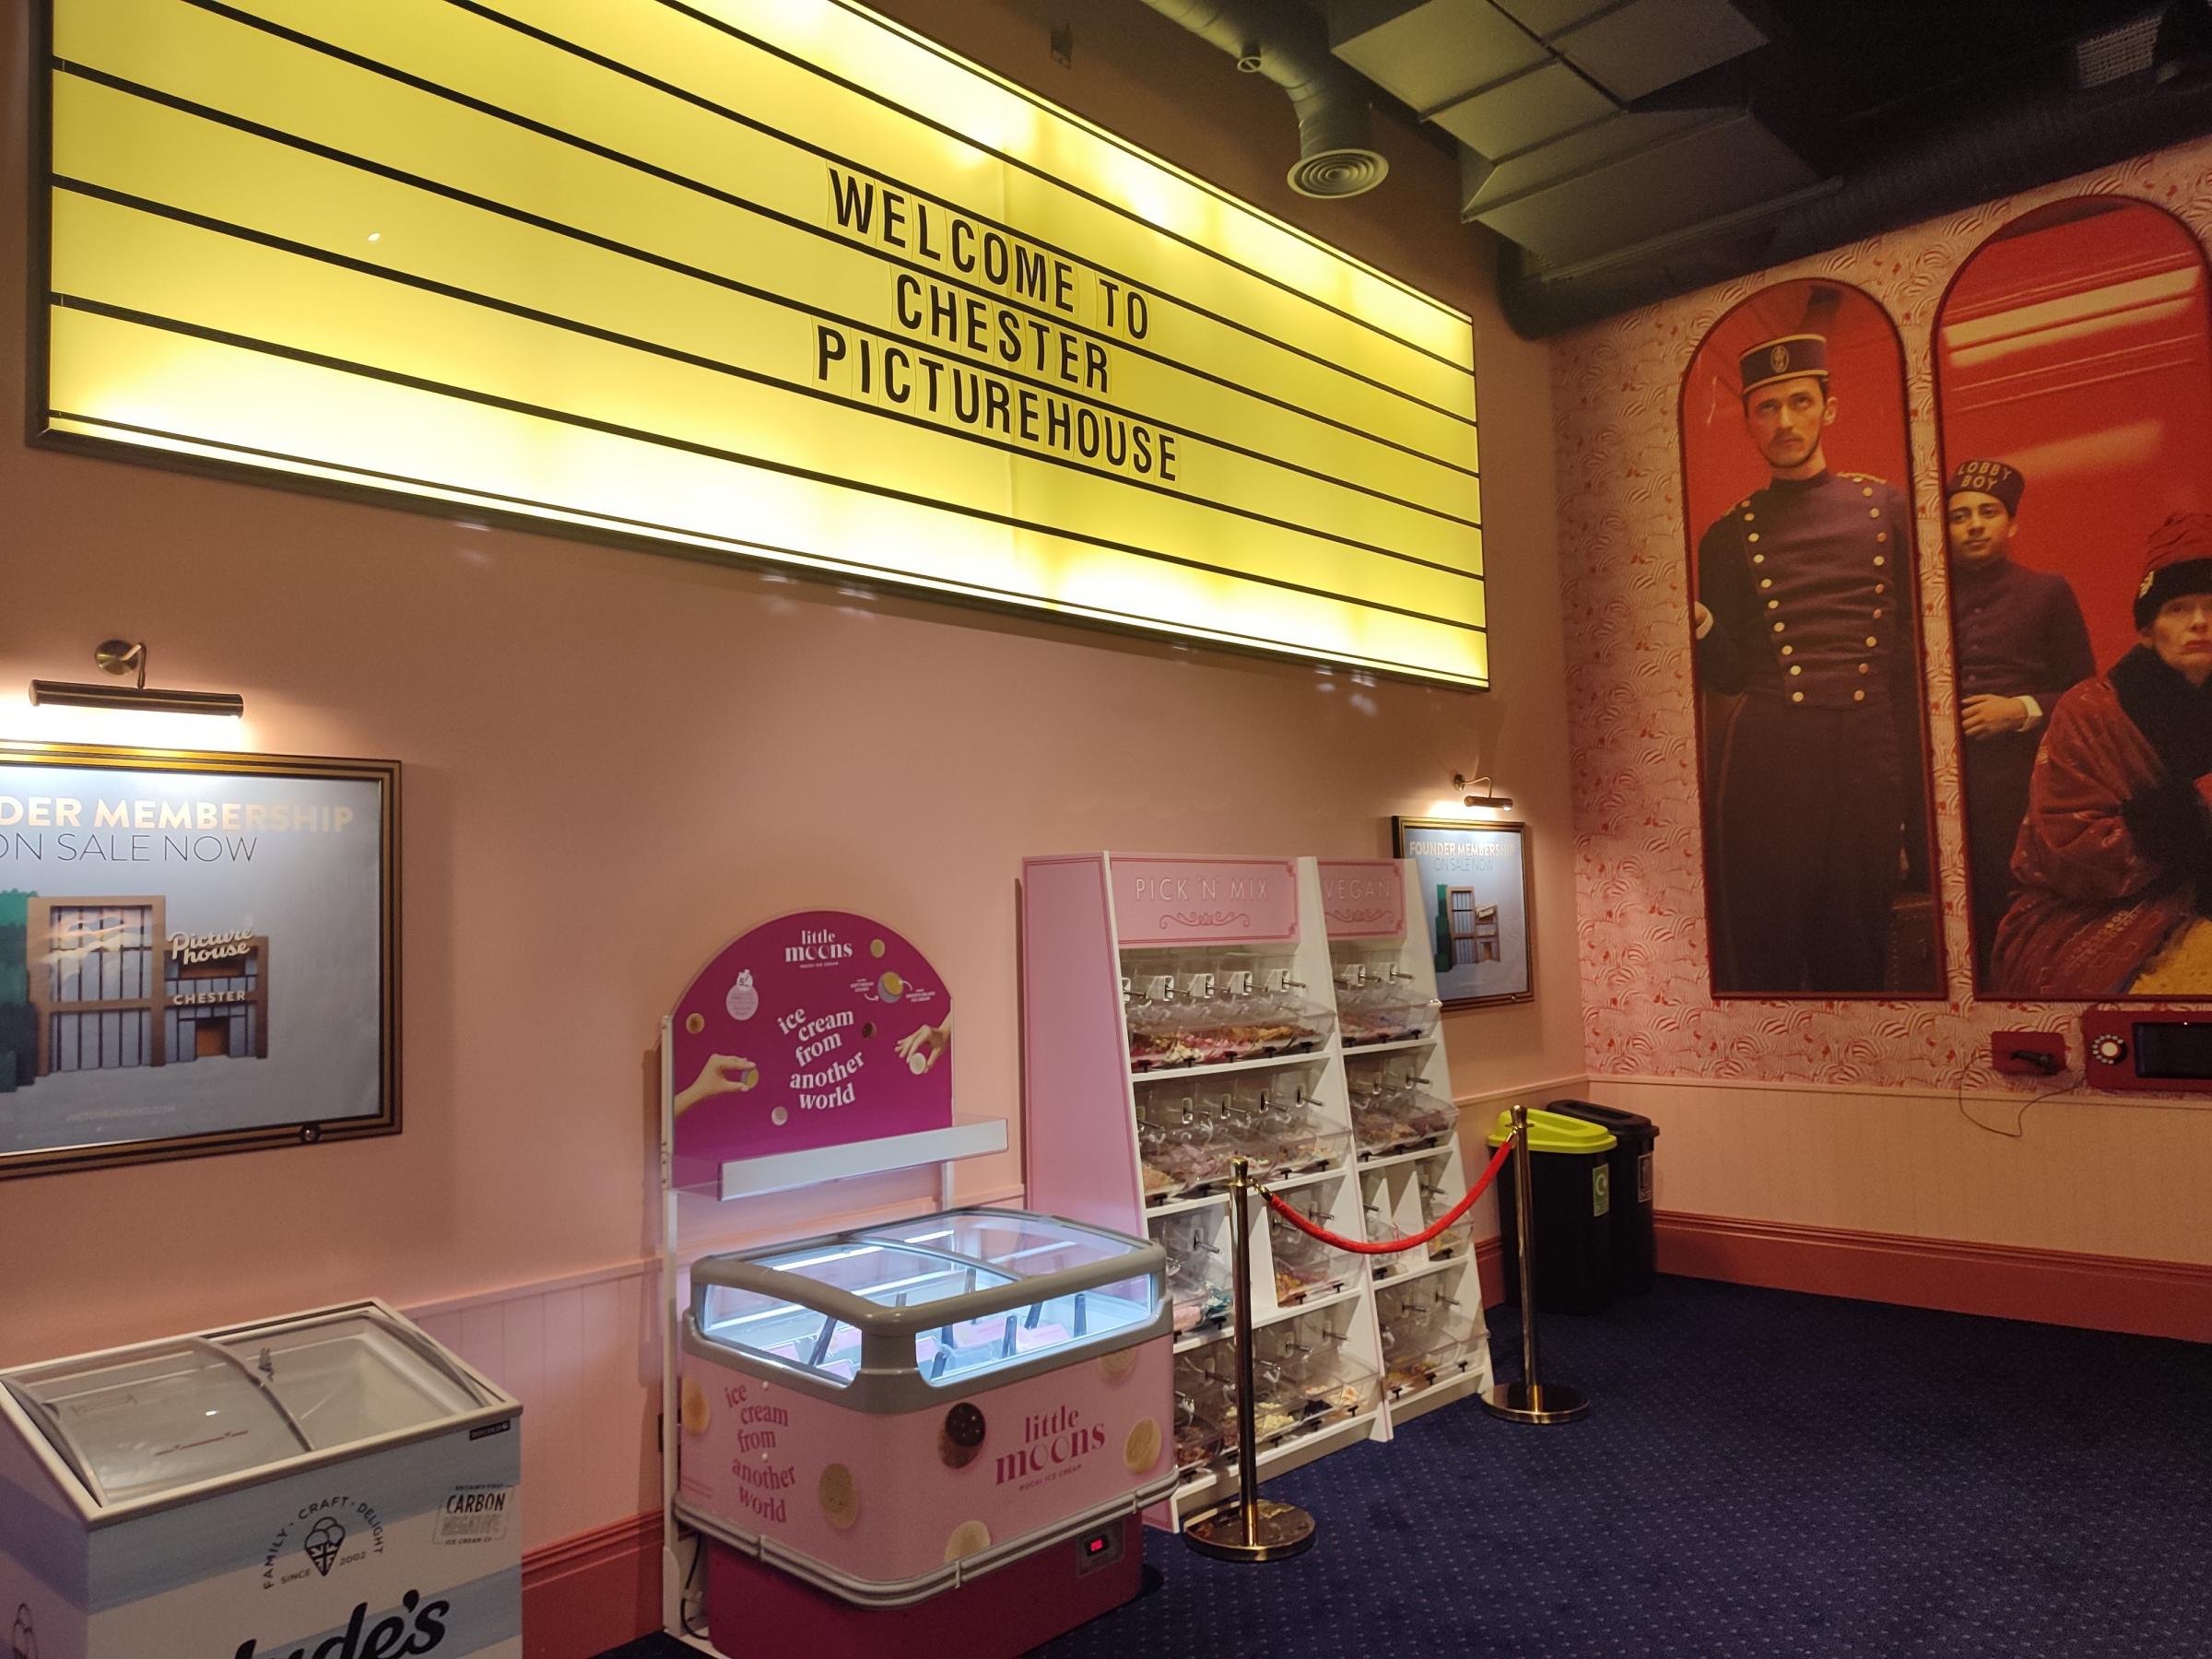 A range of snacks is available at the new Picturehouse Chester cinema.